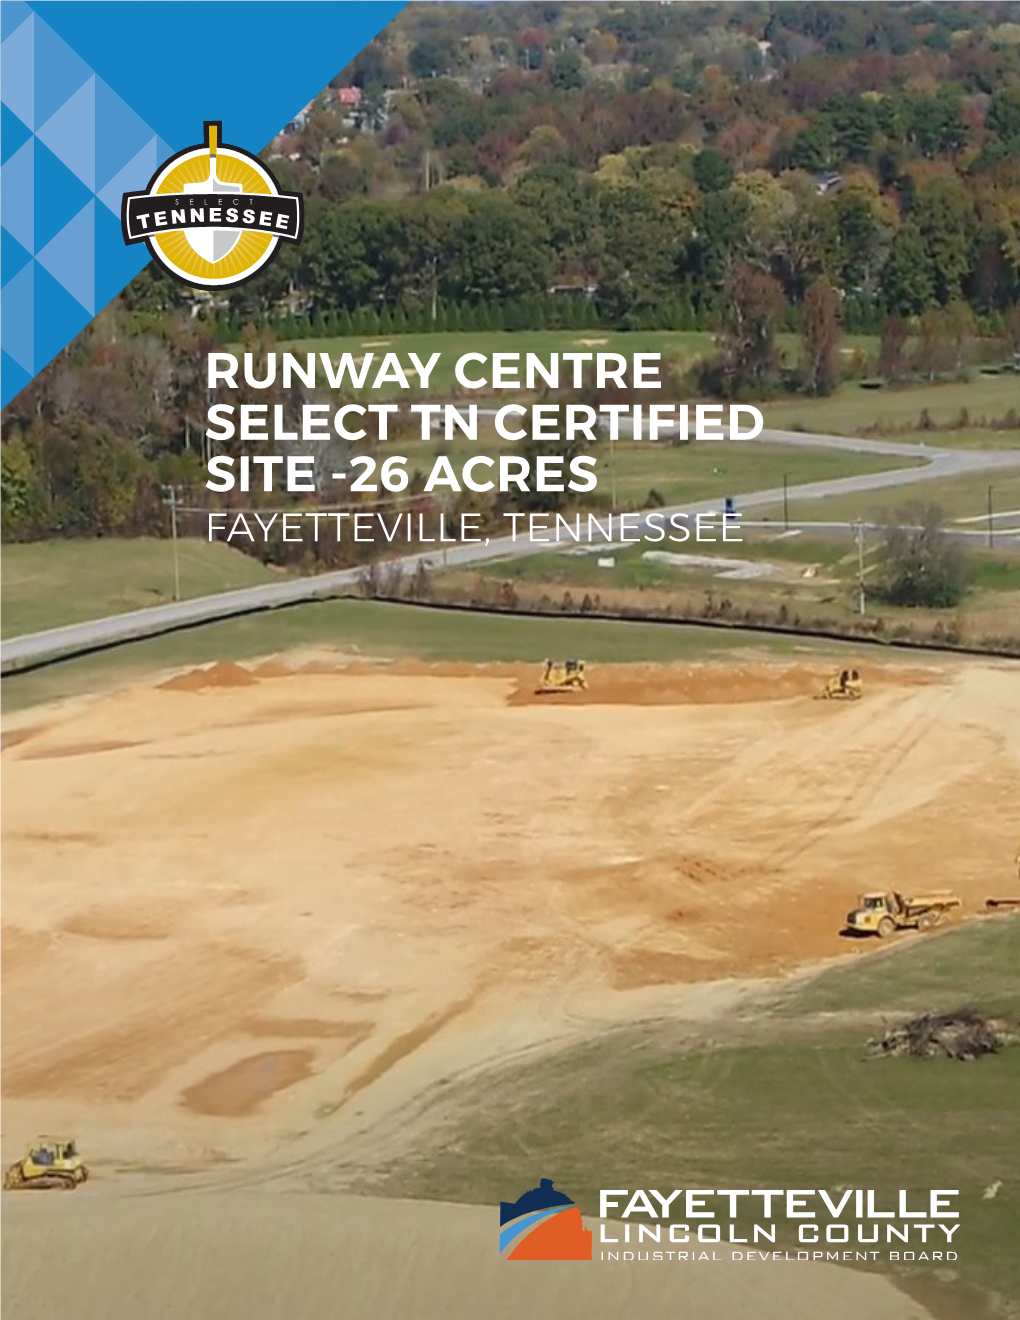 Runway Centre Select Tn Certified Site -26 Acres Fayetteville, Tennessee